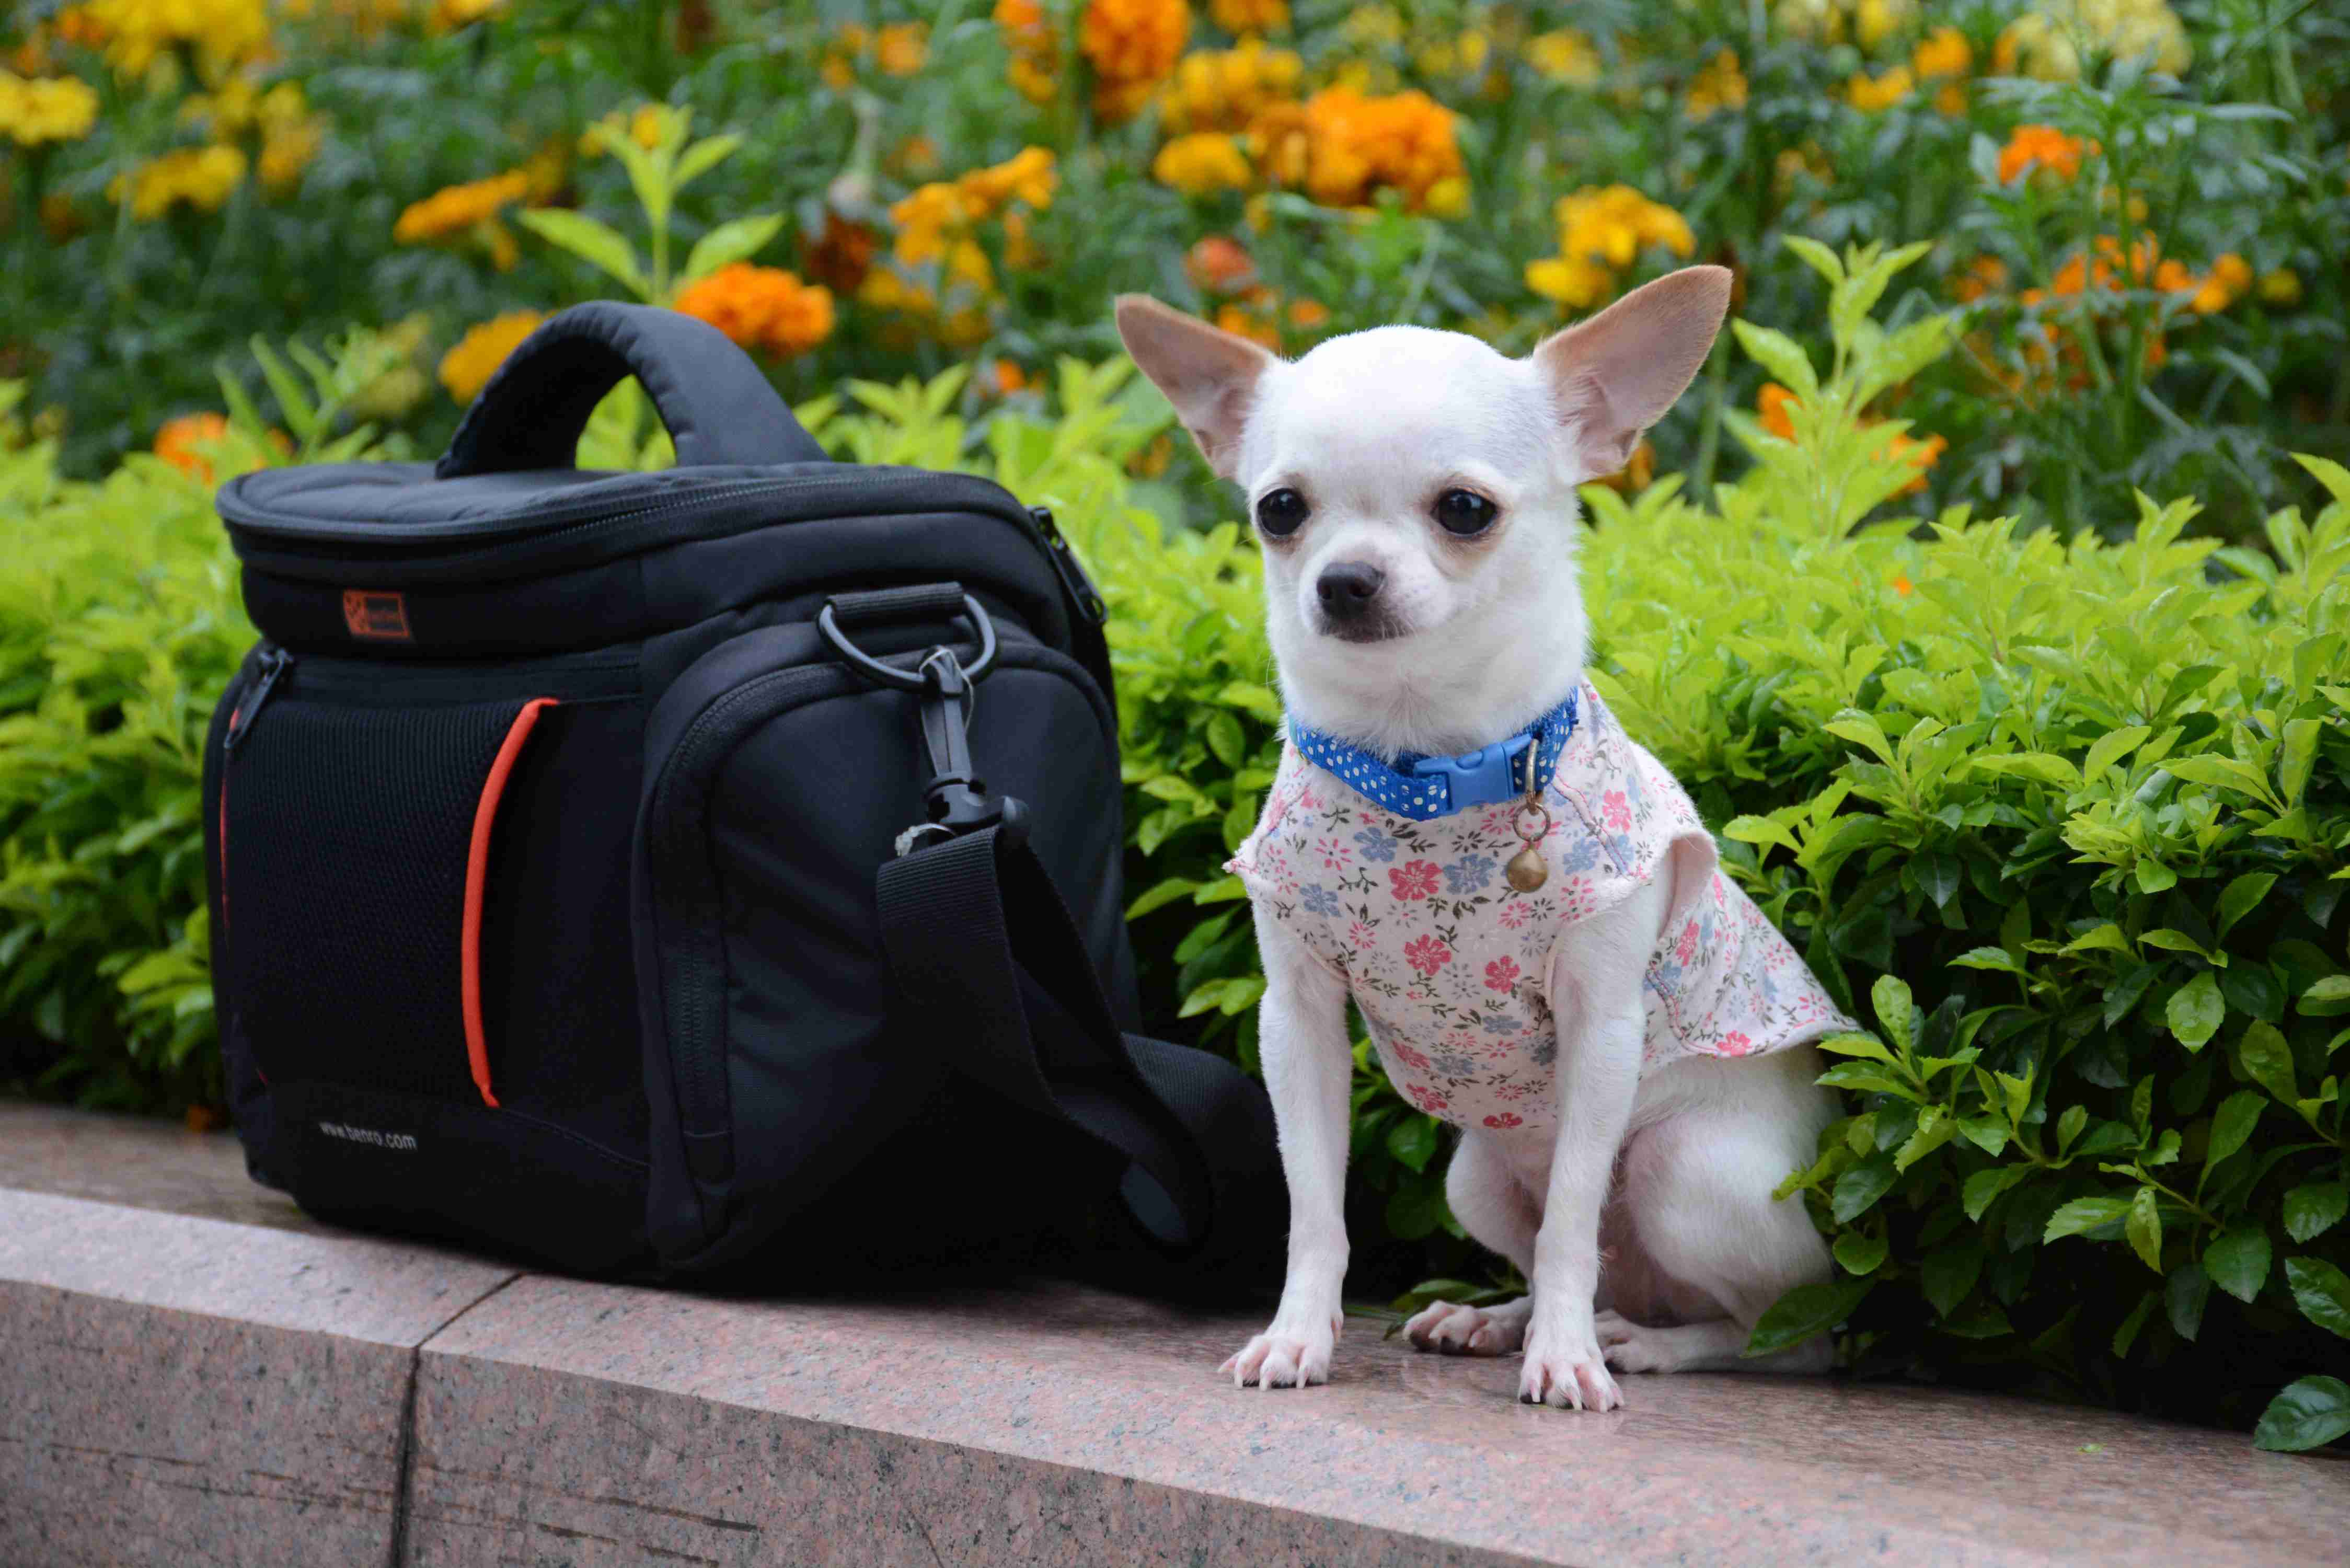 How can you safely introduce a Chihuahua to a new person or animal without triggering aggression?